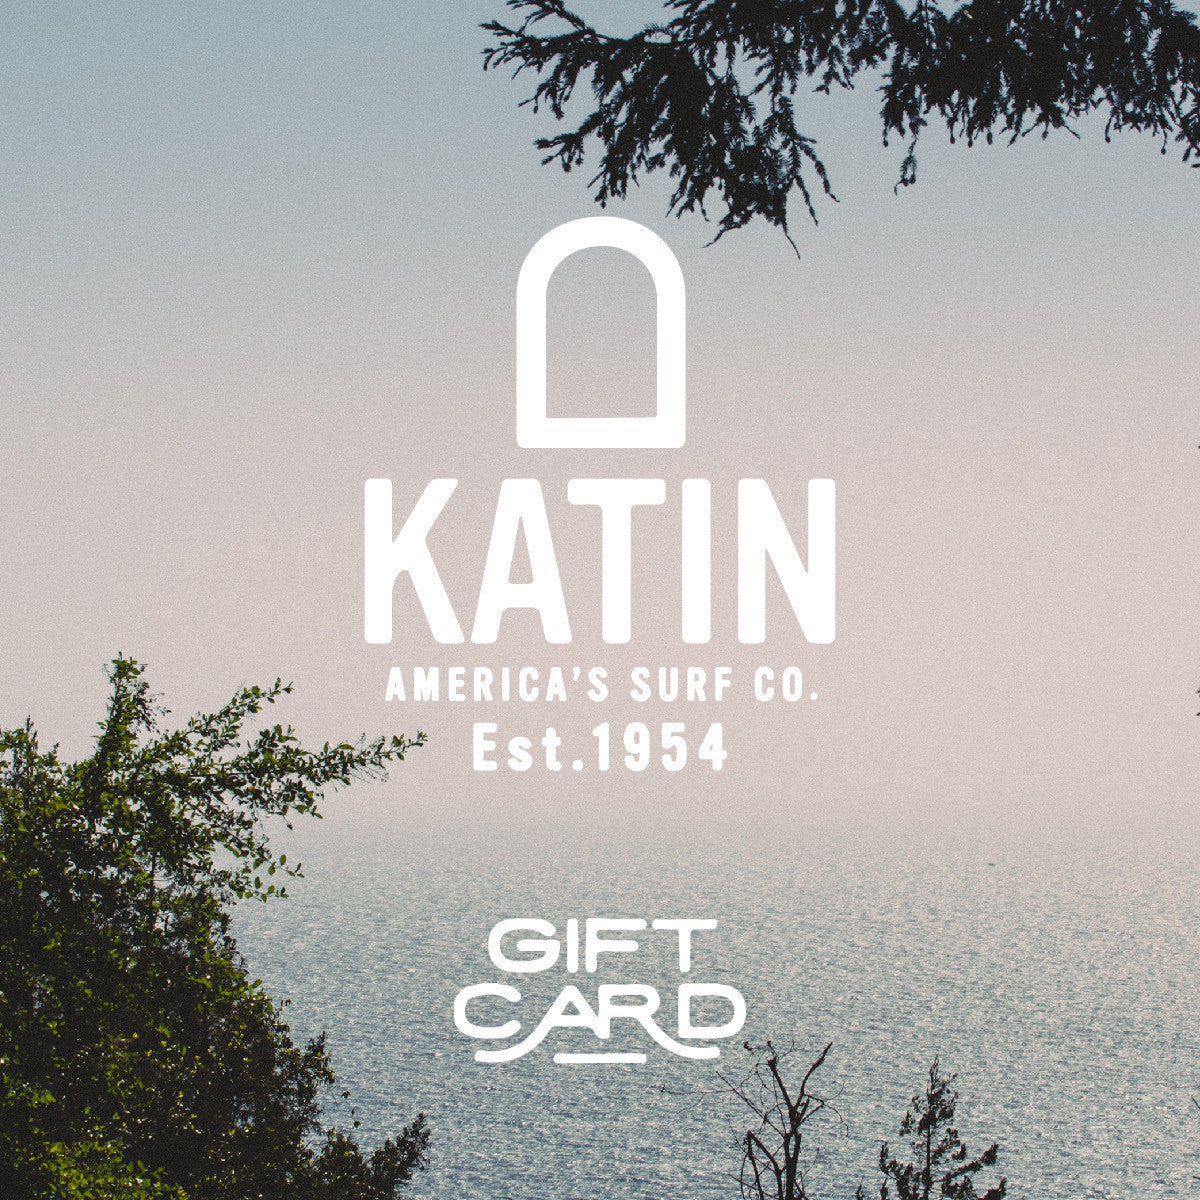 Katin Gift Cards, Now Available